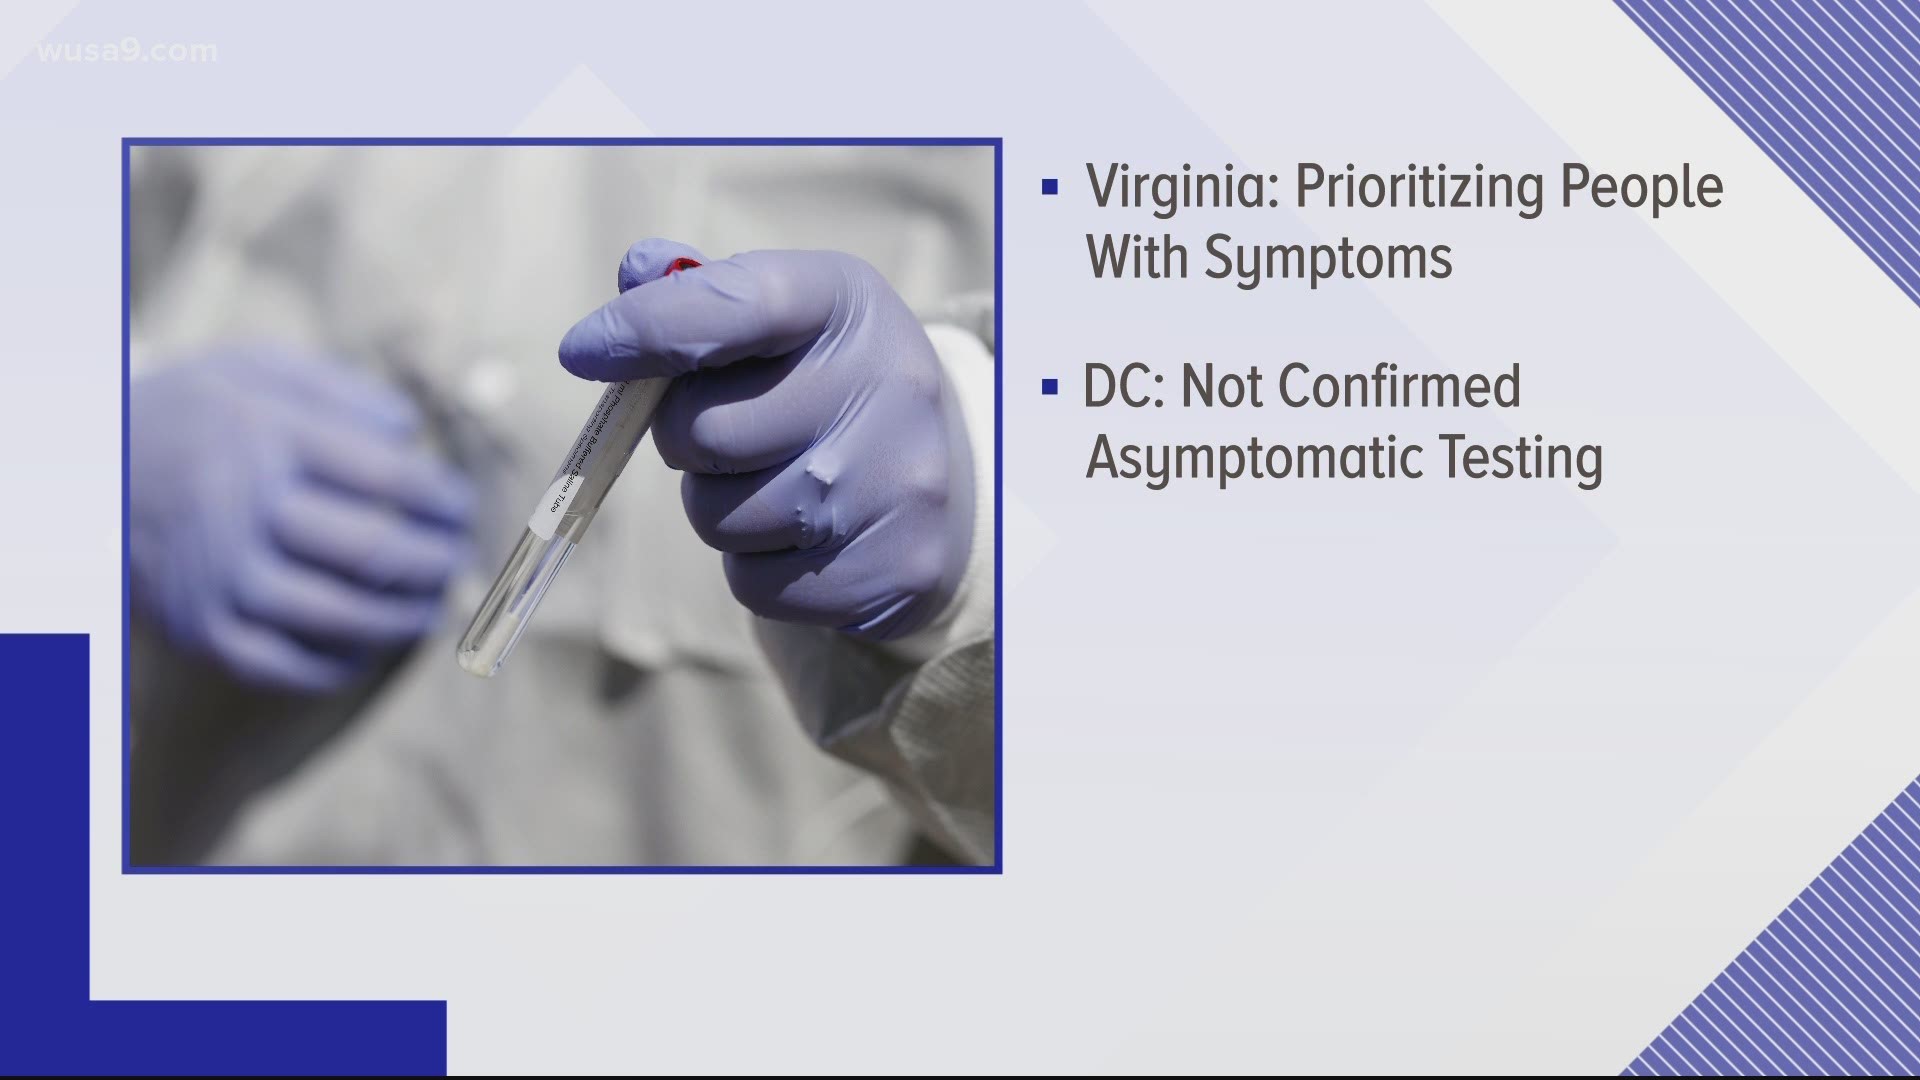 Maryland will begin offering free testing for people who are asymptomatic May 21. Virginia is currently prioritizing those with symptoms.